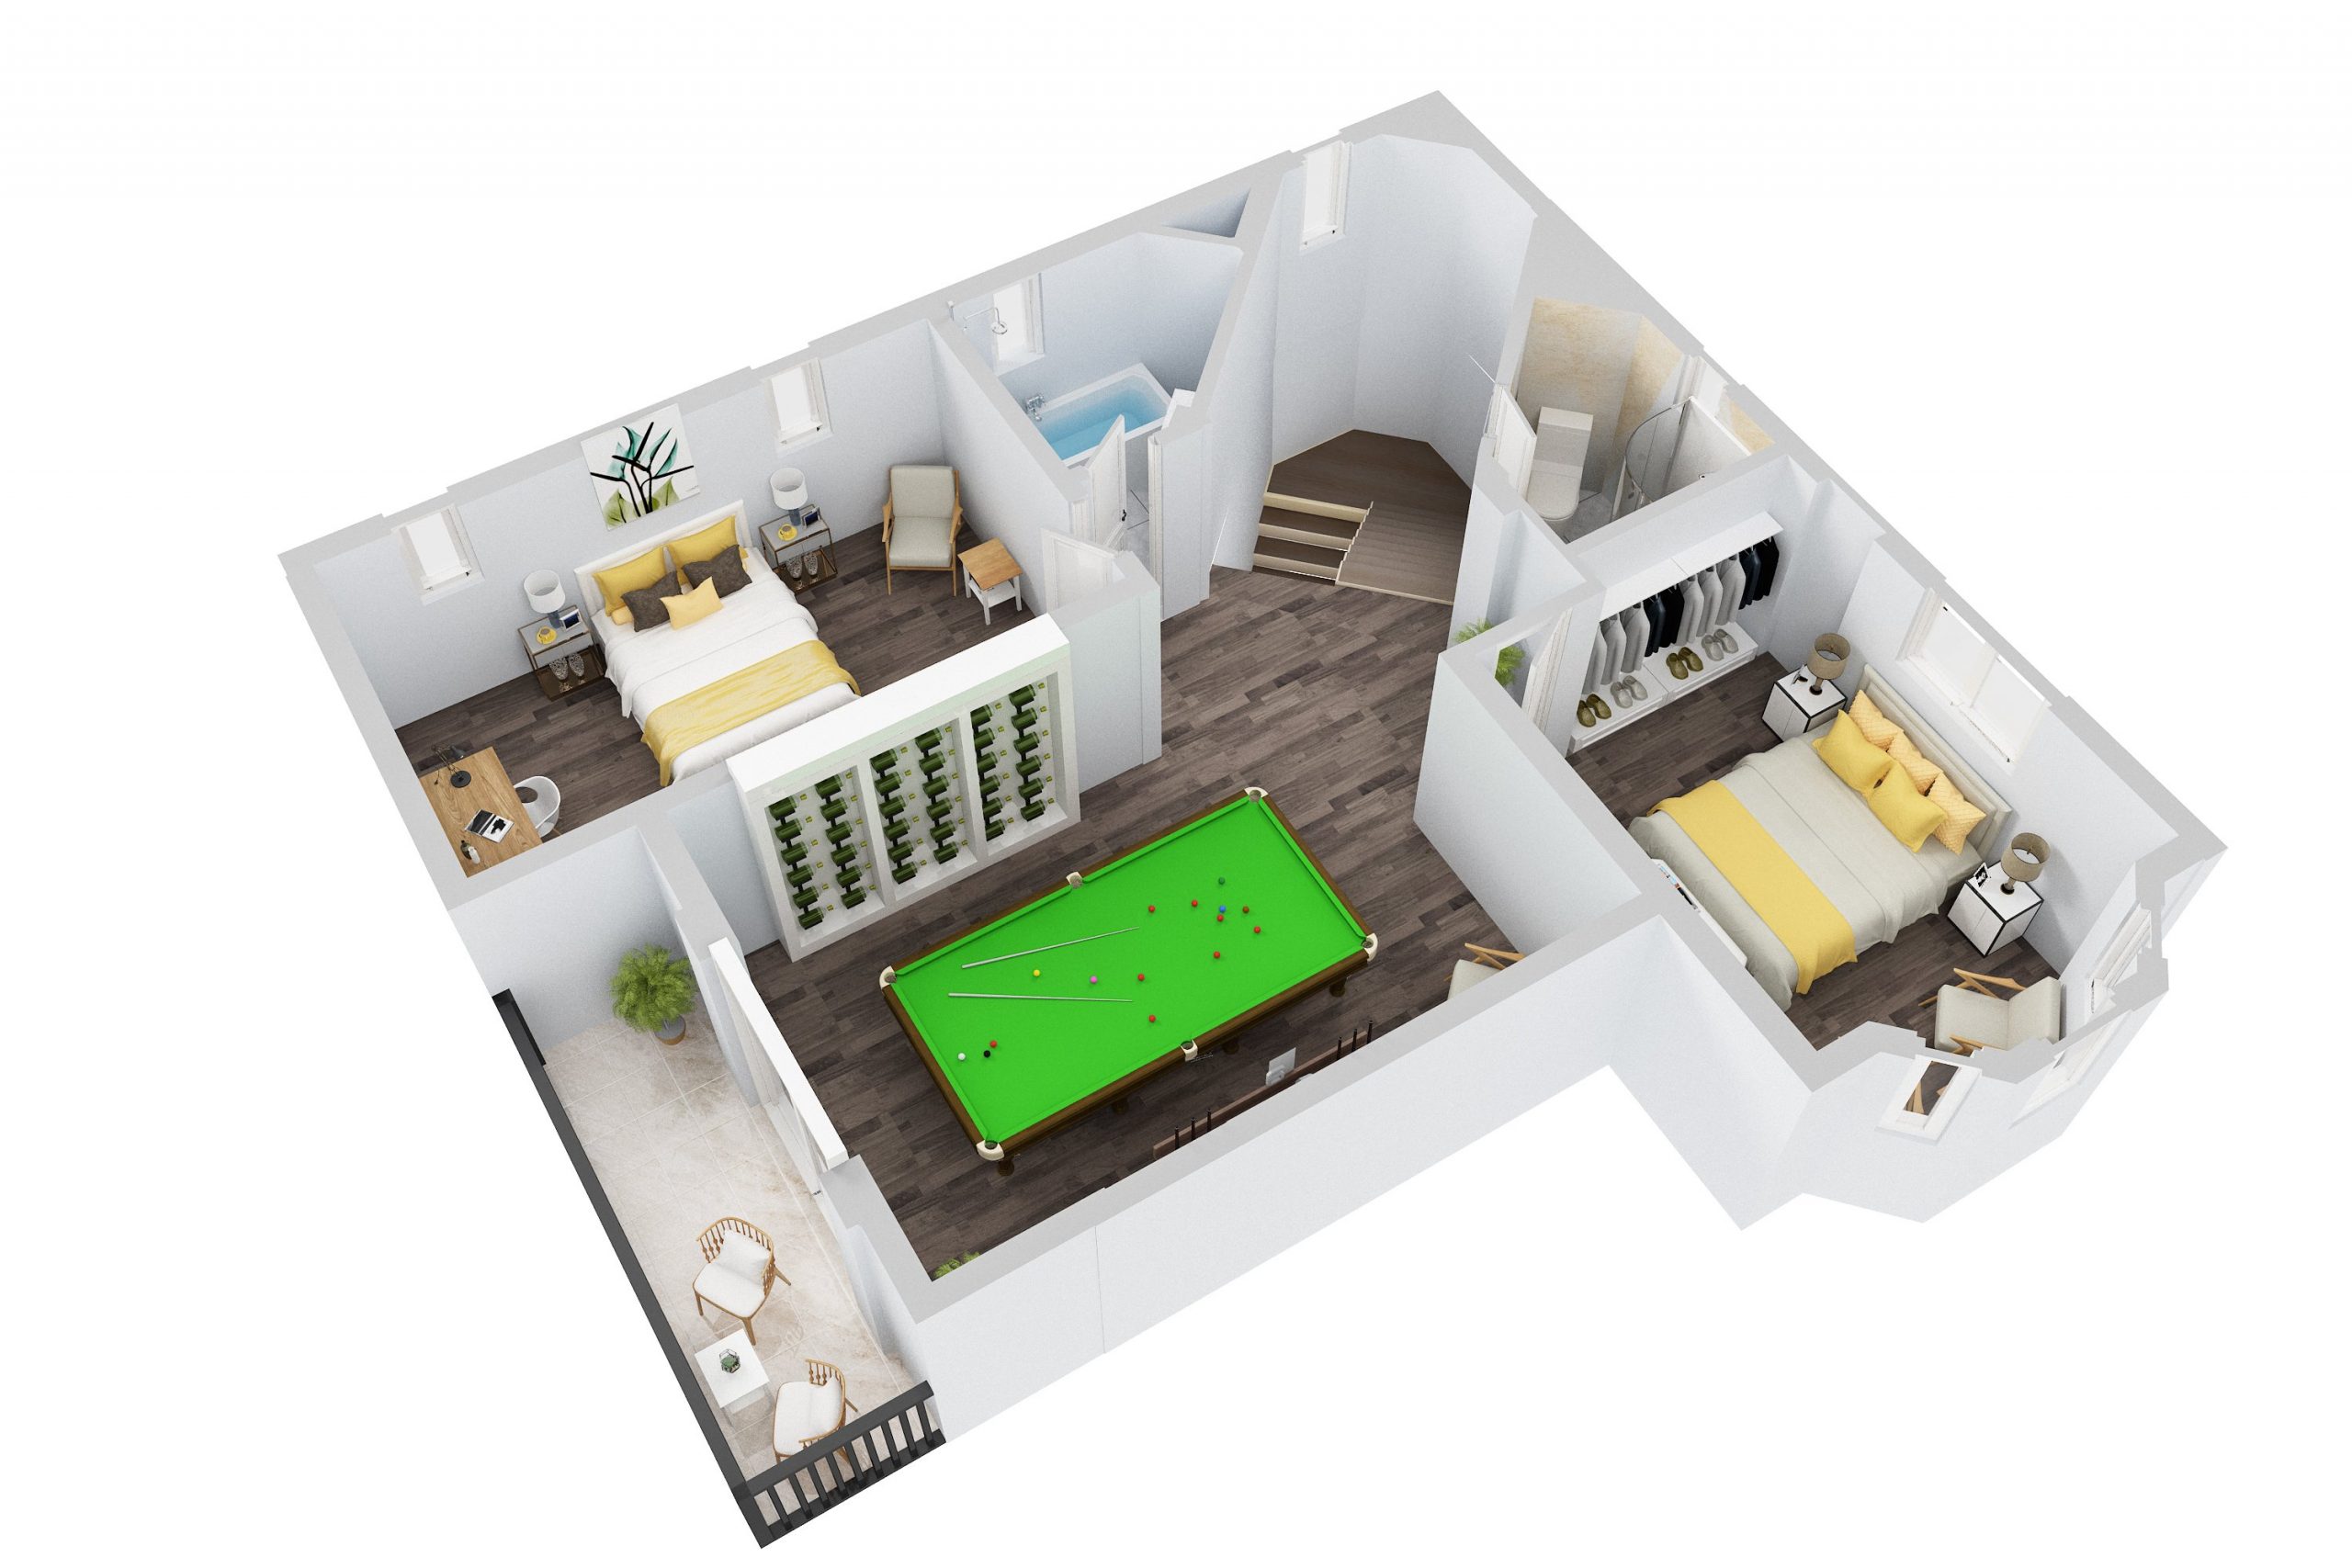 5 REASONS WHY 3D FLOOR PLANS SELL REAL ESTATE